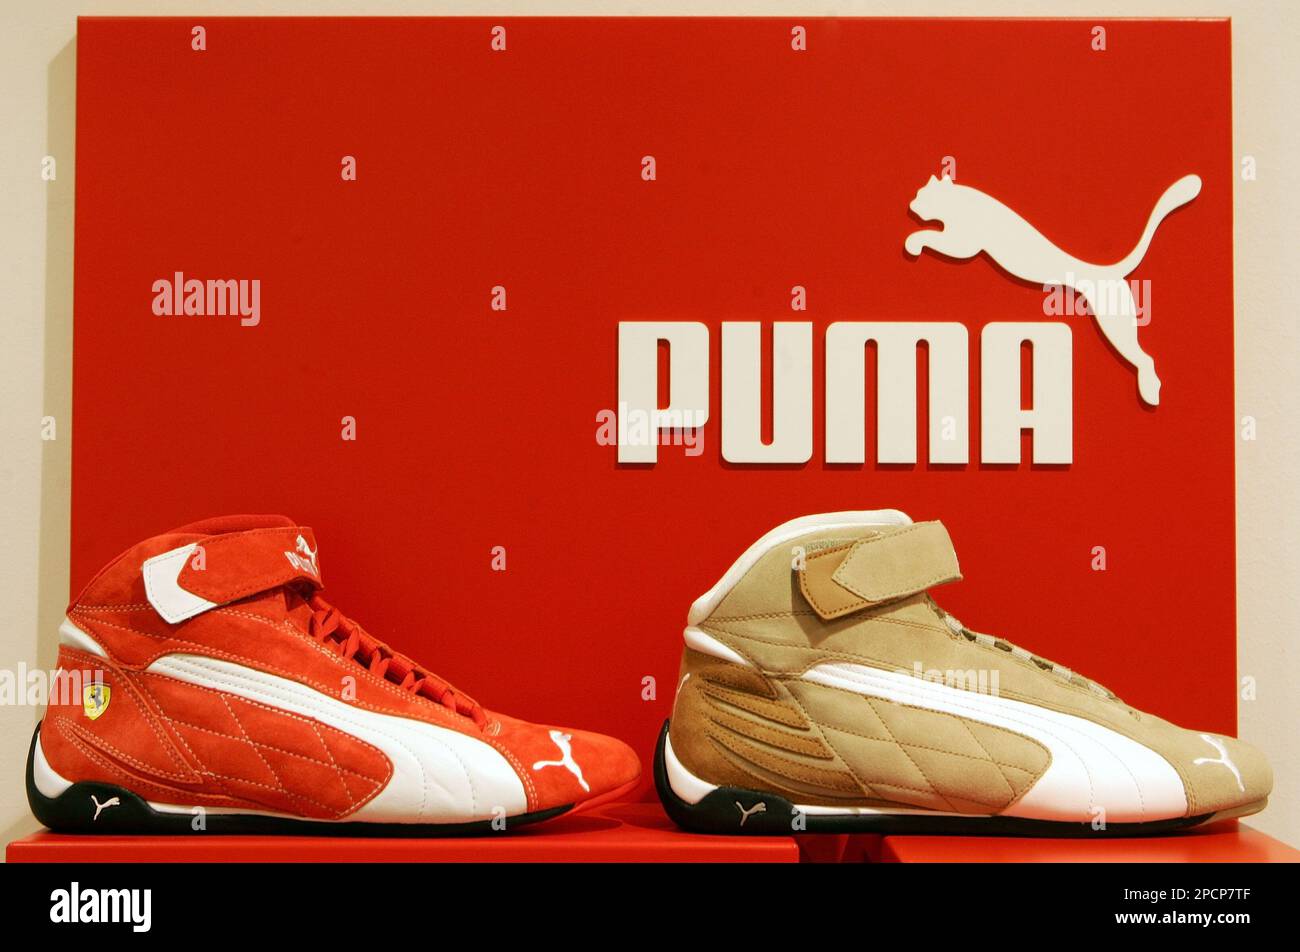 FILE Shoes by the German sportswear Puma are on display during a balance news conference in Nuremberg on Feb. 10, 2006. Puma AG said Thursday, Aug. 3, 2006 that